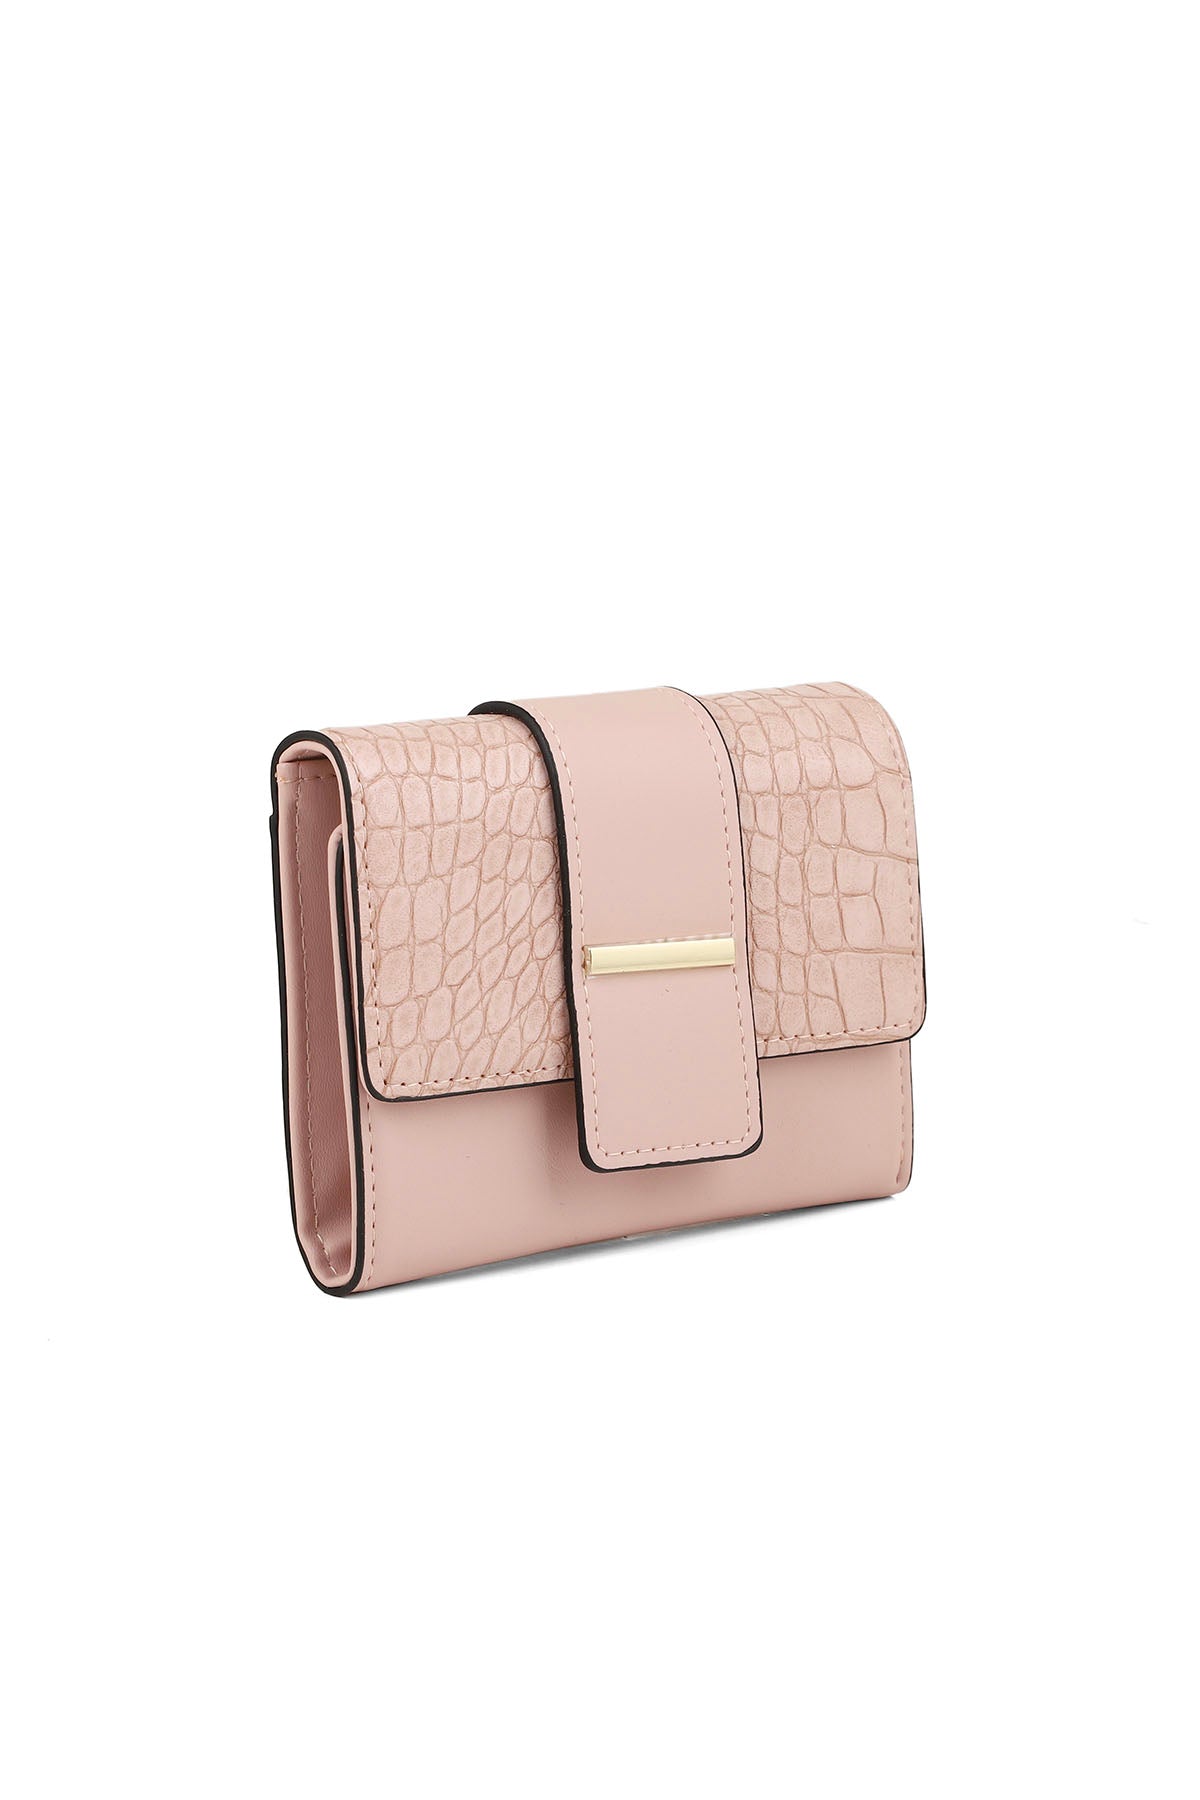 Pouch Bag B26048-Pink